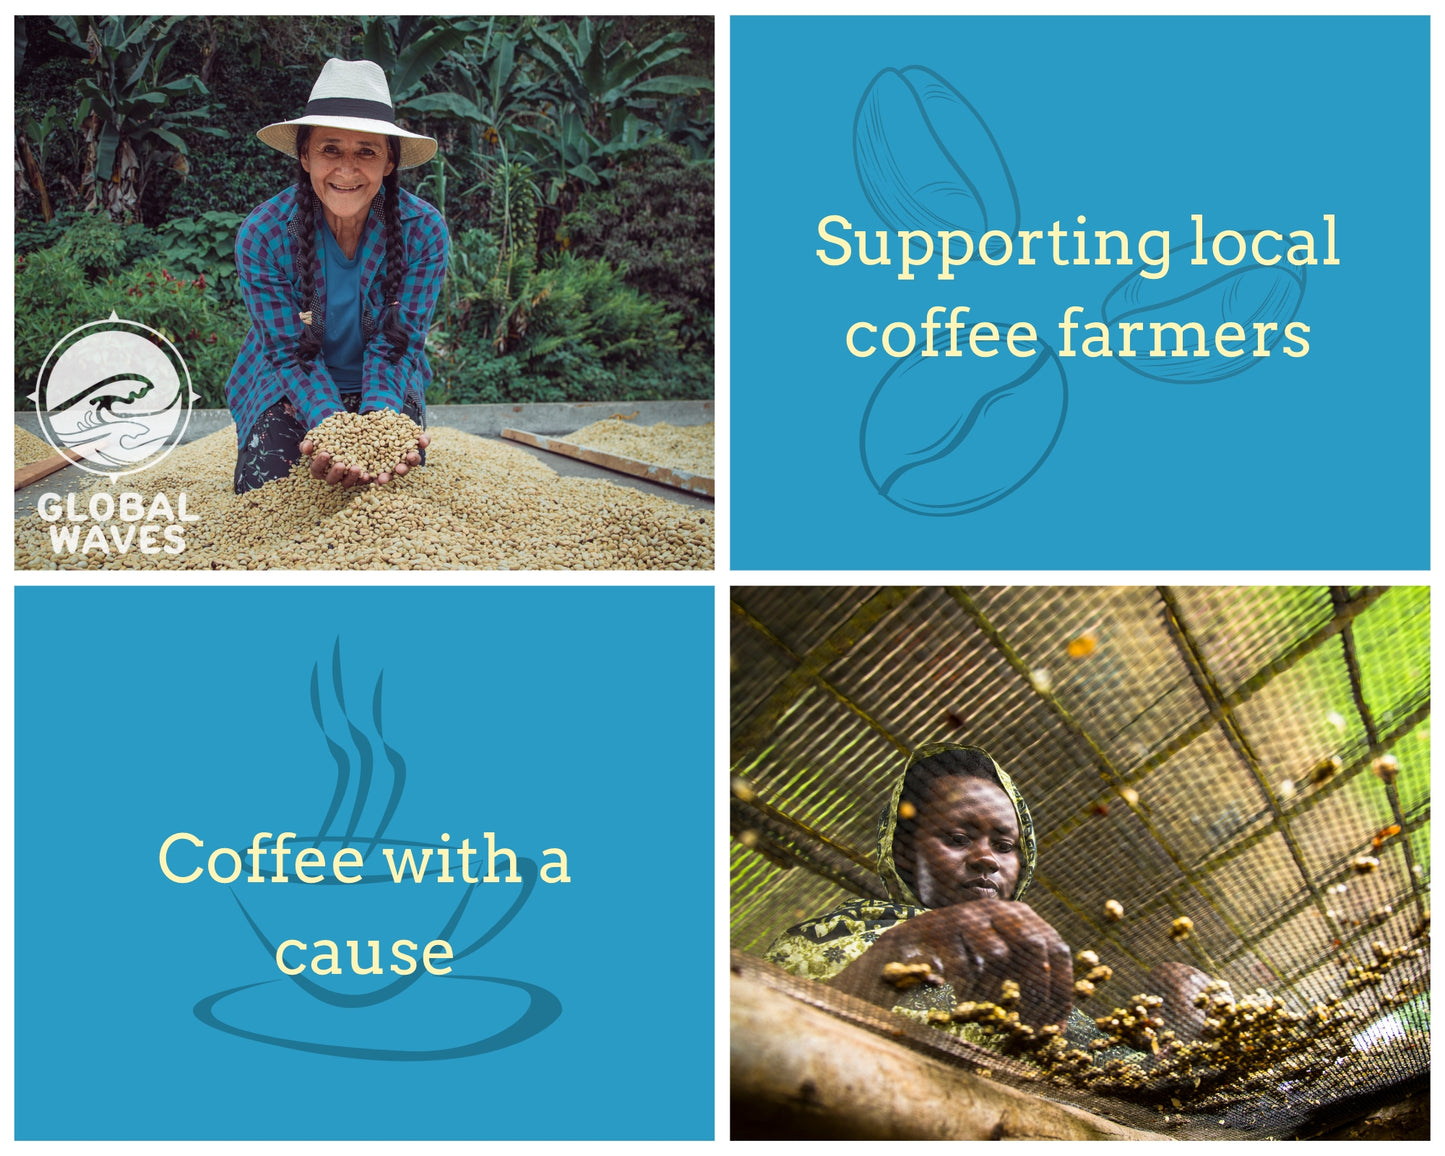 The Global Waves Angelfish Blend supports local farms in Guatemala and Ethiopia. We're proud to support these impressive farmers, as well as their families and communities.